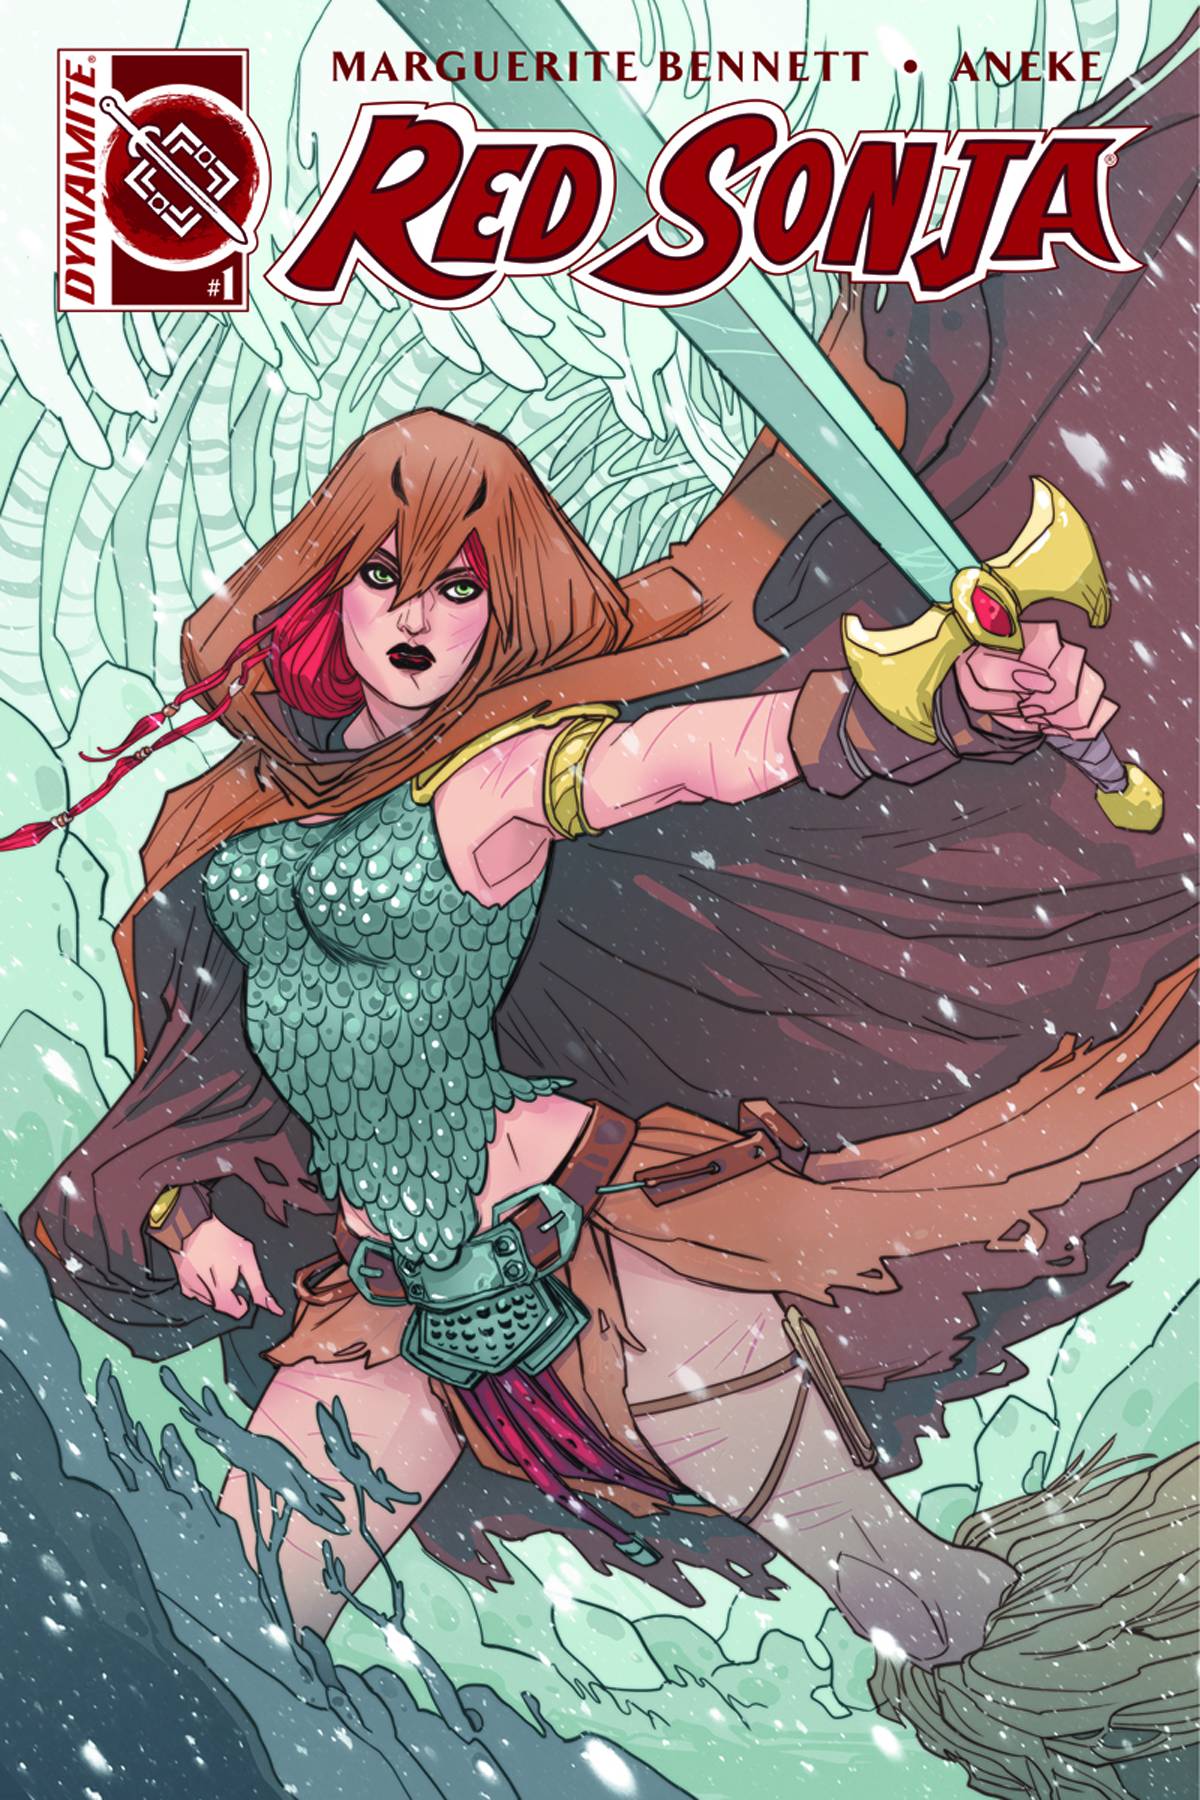 Red Sonja Volume 3 #1 Cover A Sauvage